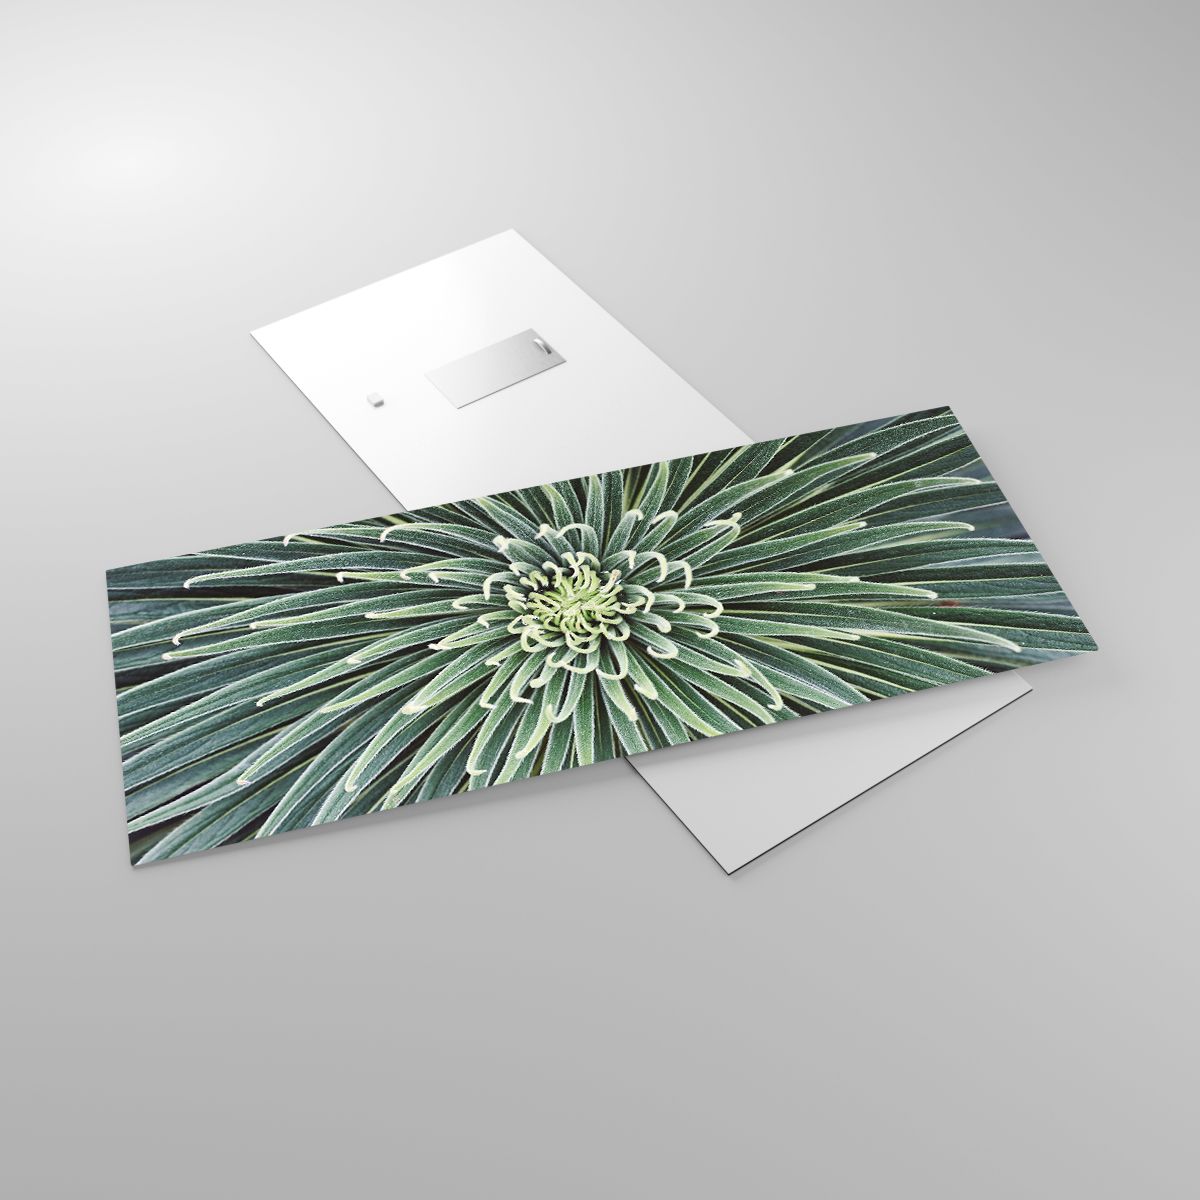 Glass picture  Agave Flower, Glass picture  Agave, Glass picture  Flowers, Glass picture  Tropics, Glass picture  Exotic